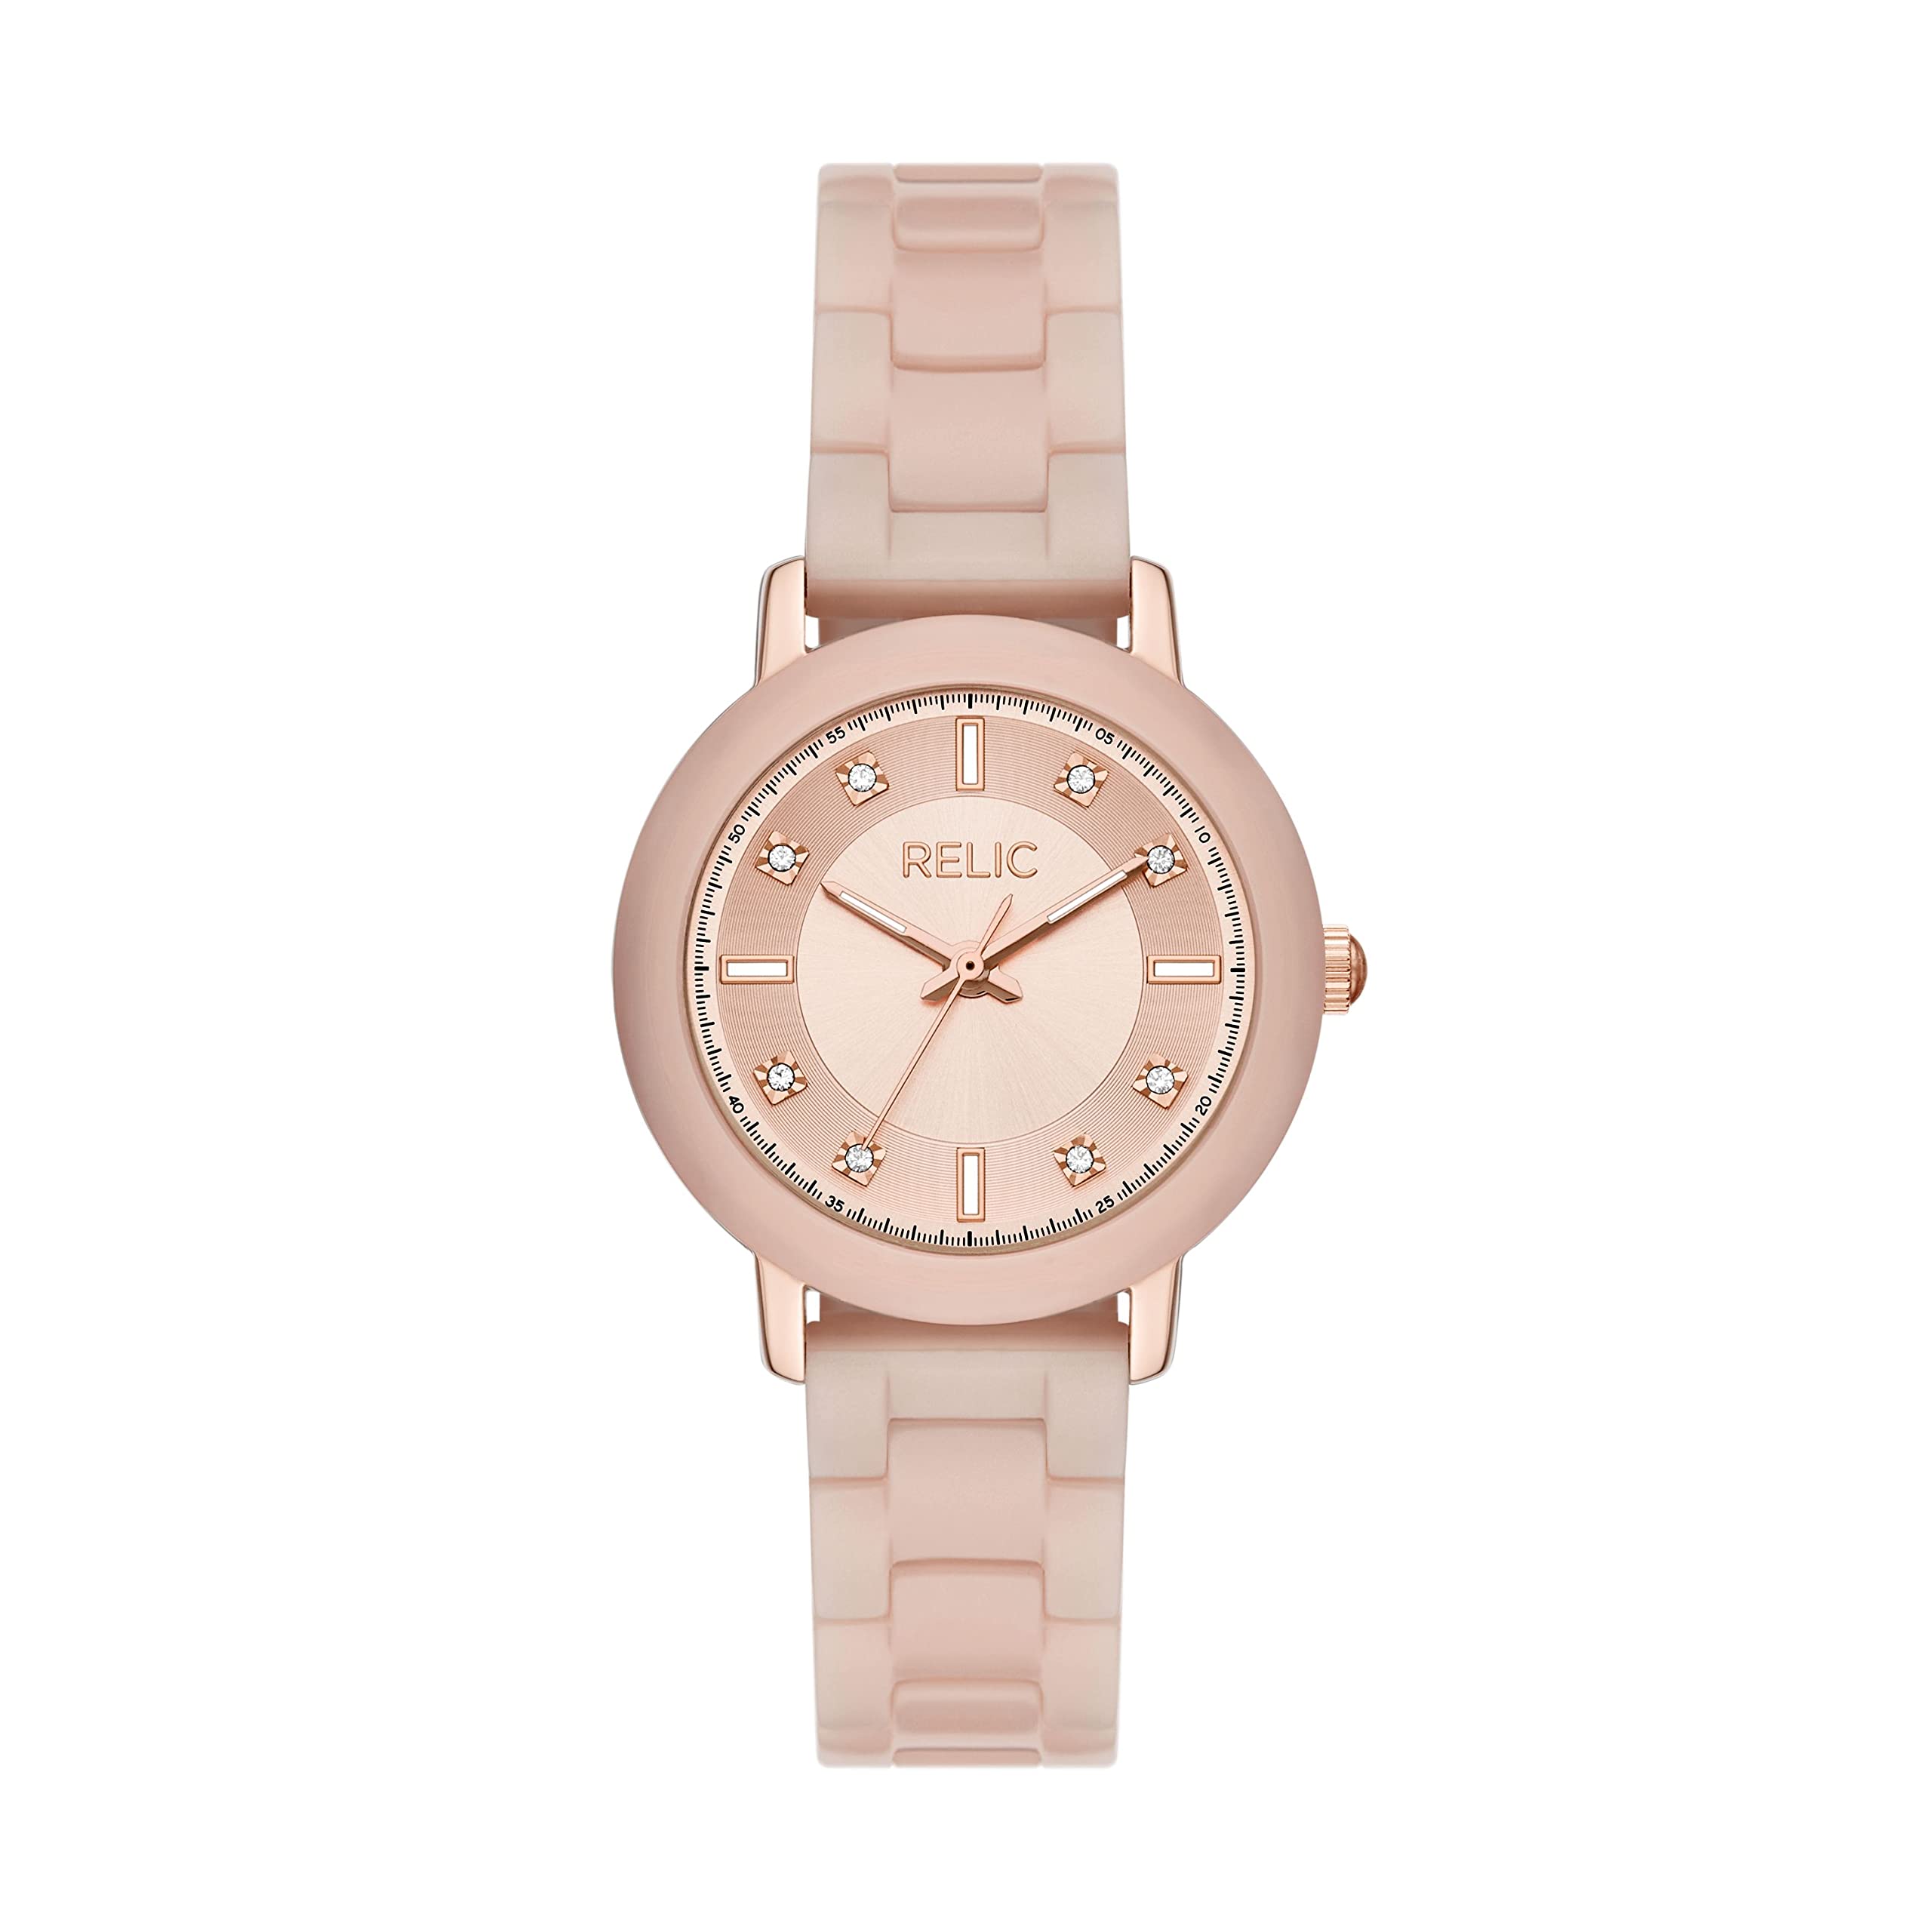 Relic by Fossil Dress Watch with Stainless Steel Strap